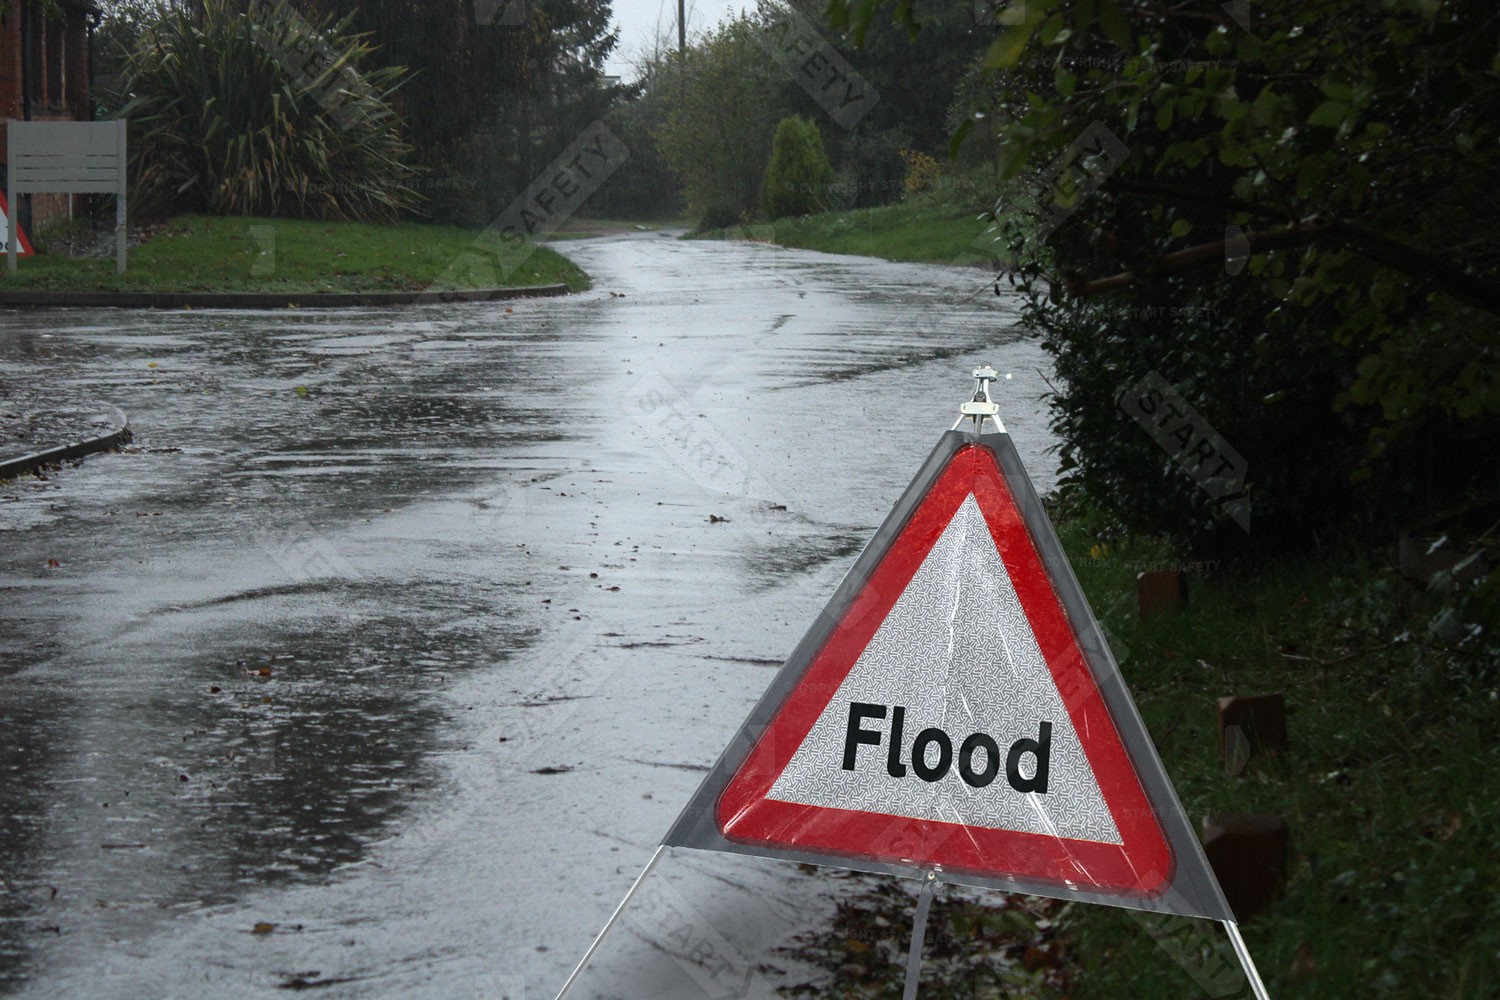 Classic Flood Roll-up Sign Used On Flooded Road